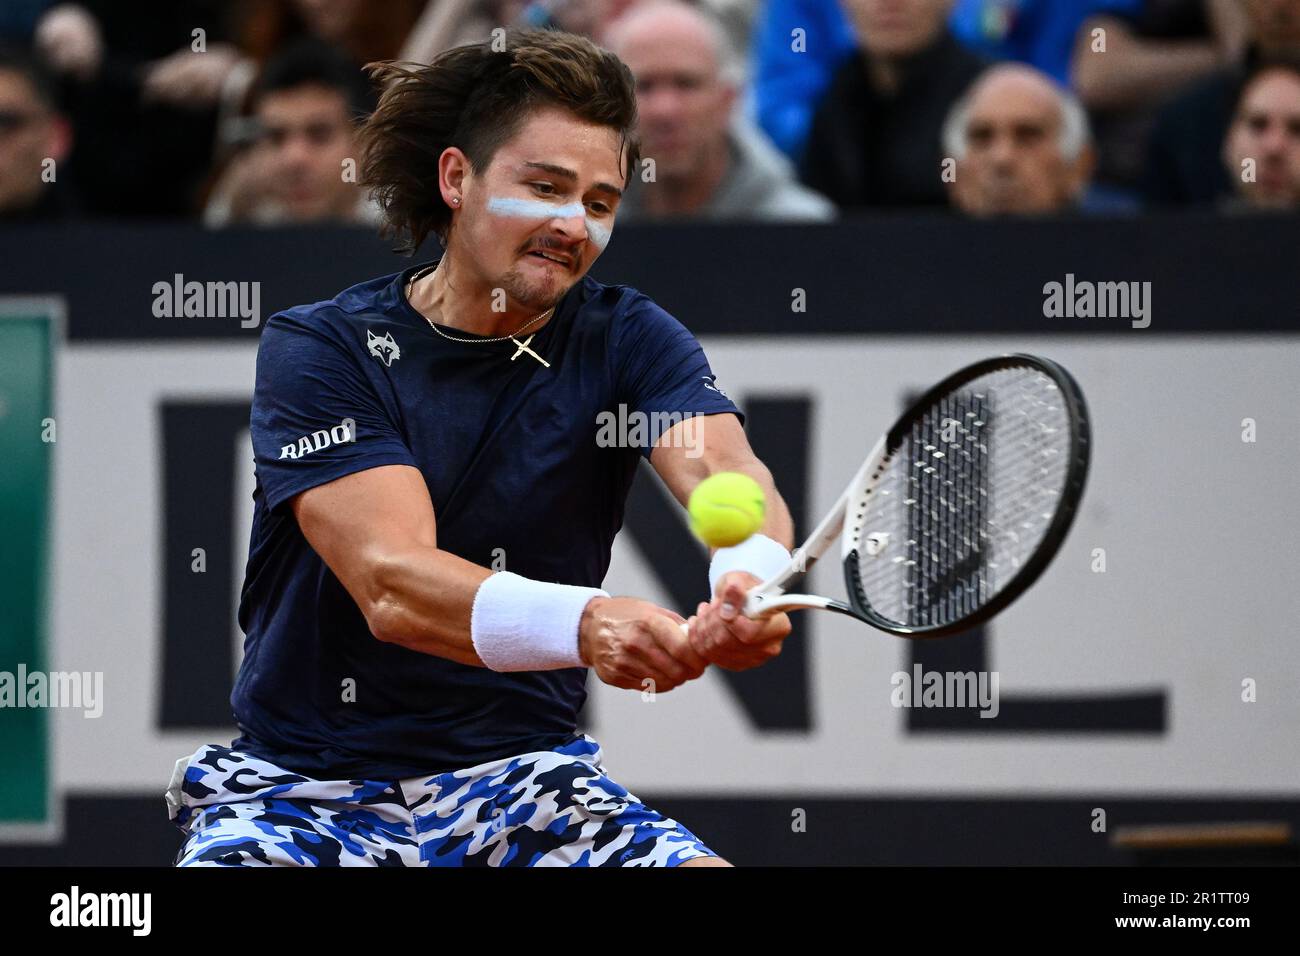 Rome, Italy. 15th May, 2023. Jeffrey John JJ Wolf of United States of America in action during his match against Alexander Zverev of Germany at the Internazionali BNL d'Italia tennis tournament at Foro Italico in Rome, Italy on May 15th, 2023. Credit: Insidefoto di andrea staccioli/Alamy Live News Stock Photo